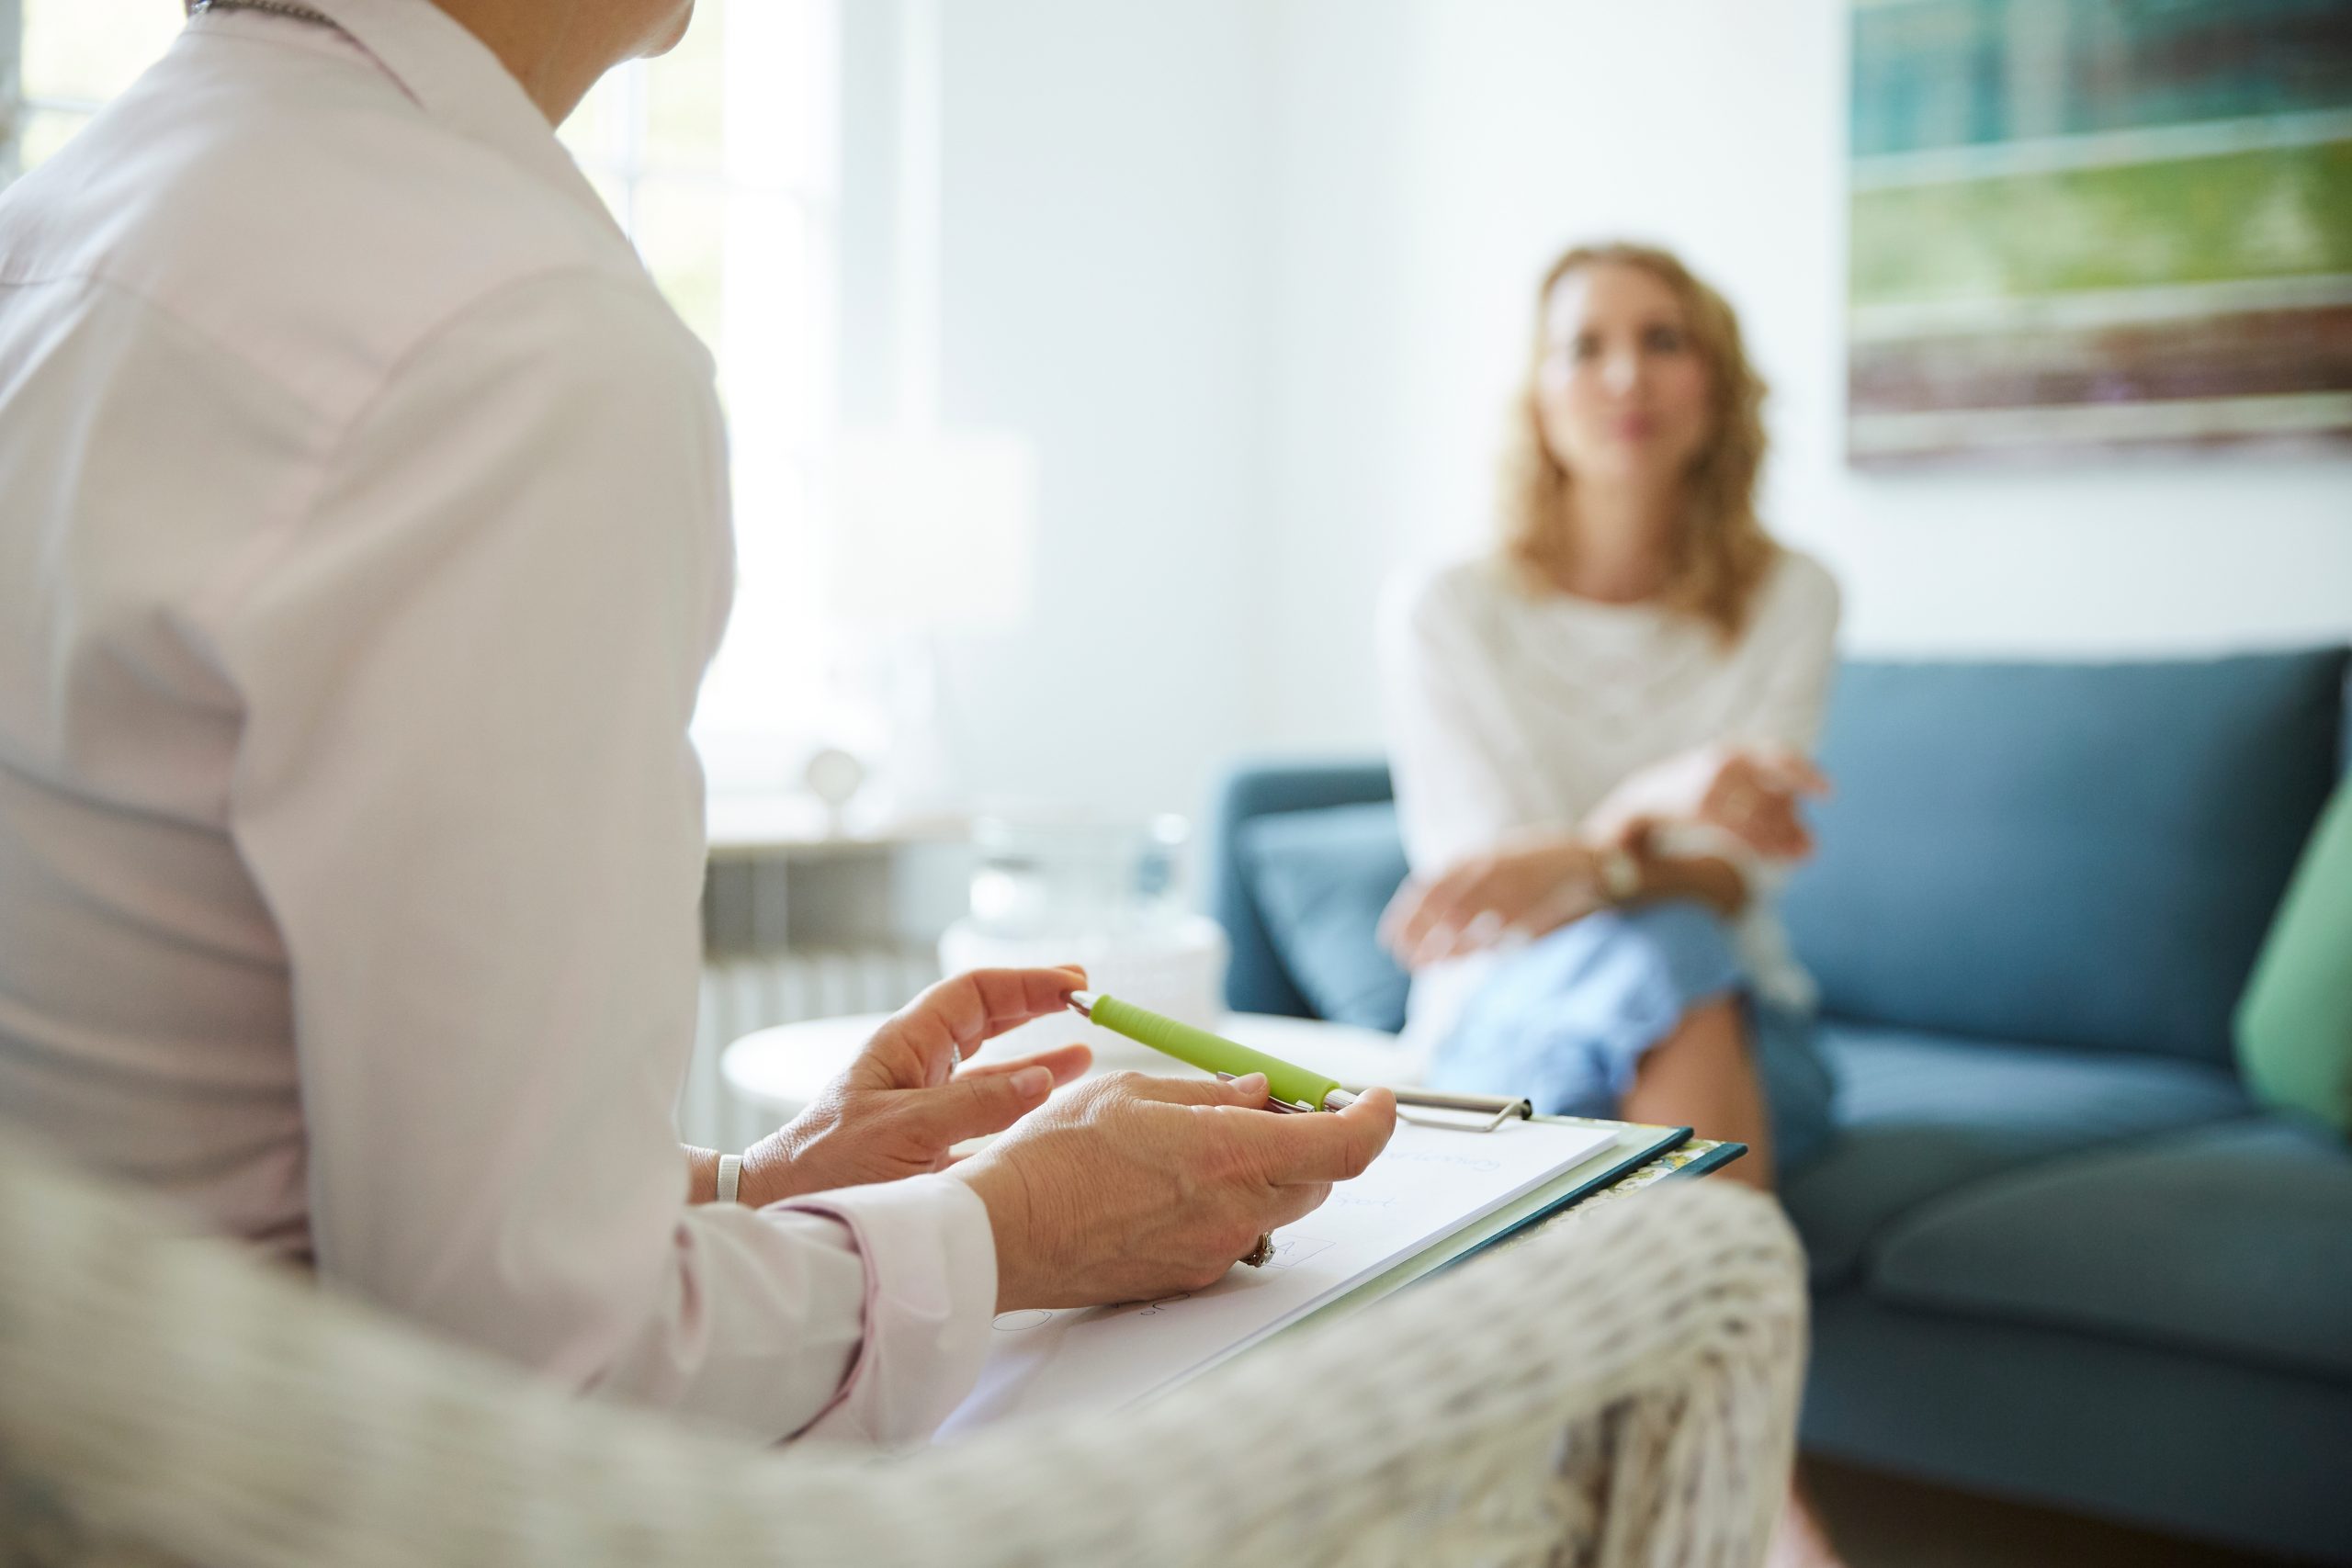 A therapist holding a clipboard and pen engages in discussion with a patient, who is sitting on a couch in a bright room. The patient appears relaxed and attentive, while the therapist is partially visible from the side, suggesting a professional mental health treatment setting.